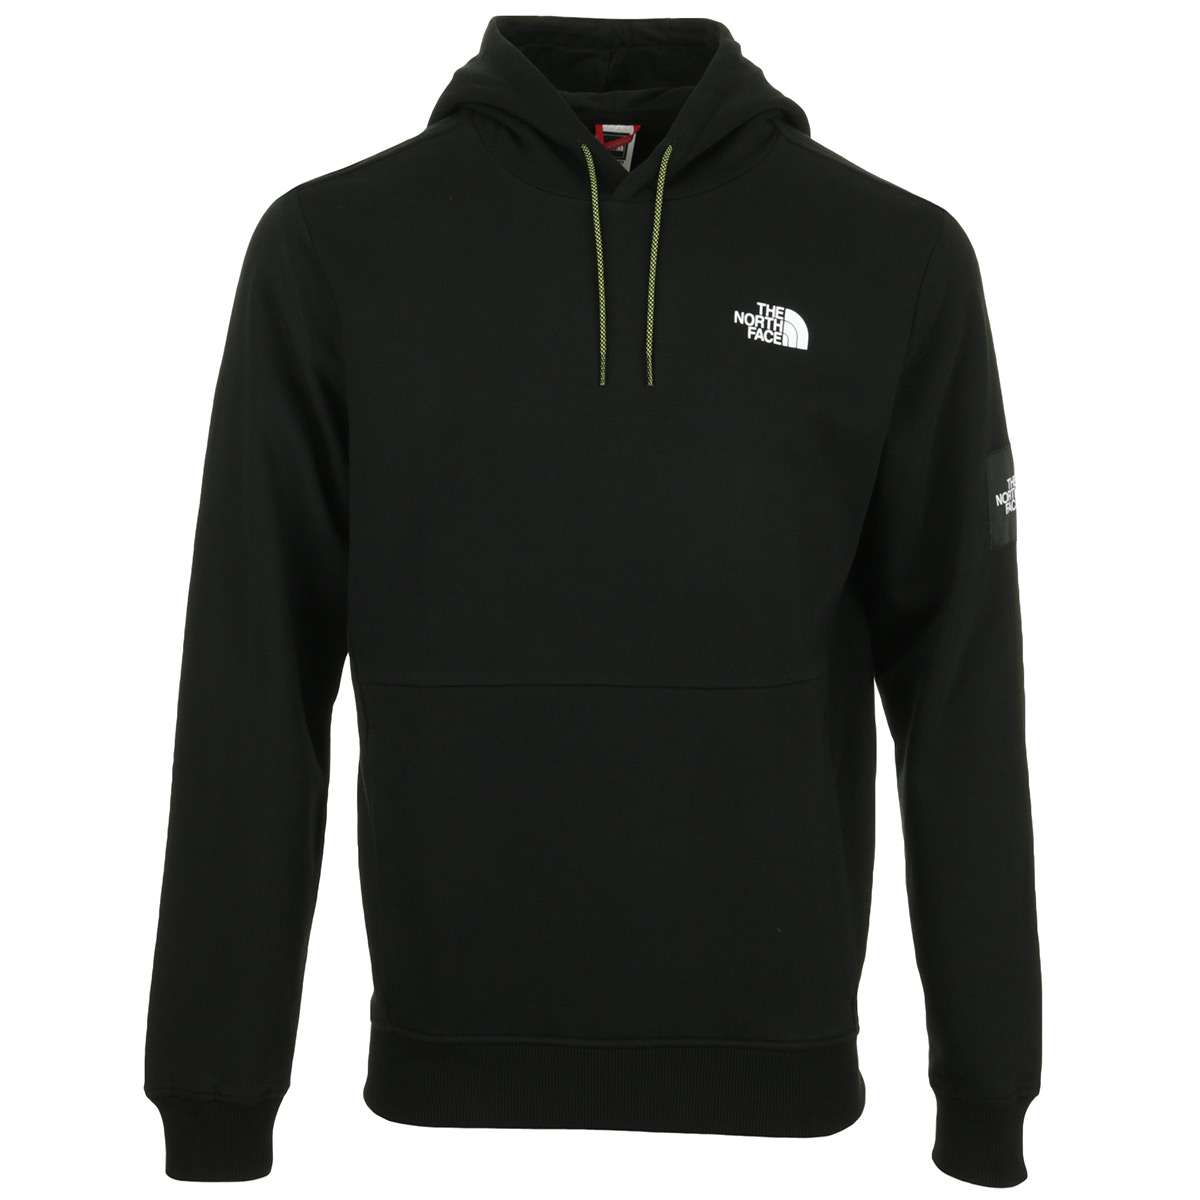 The North Face "Search & Rescue Hoodie"